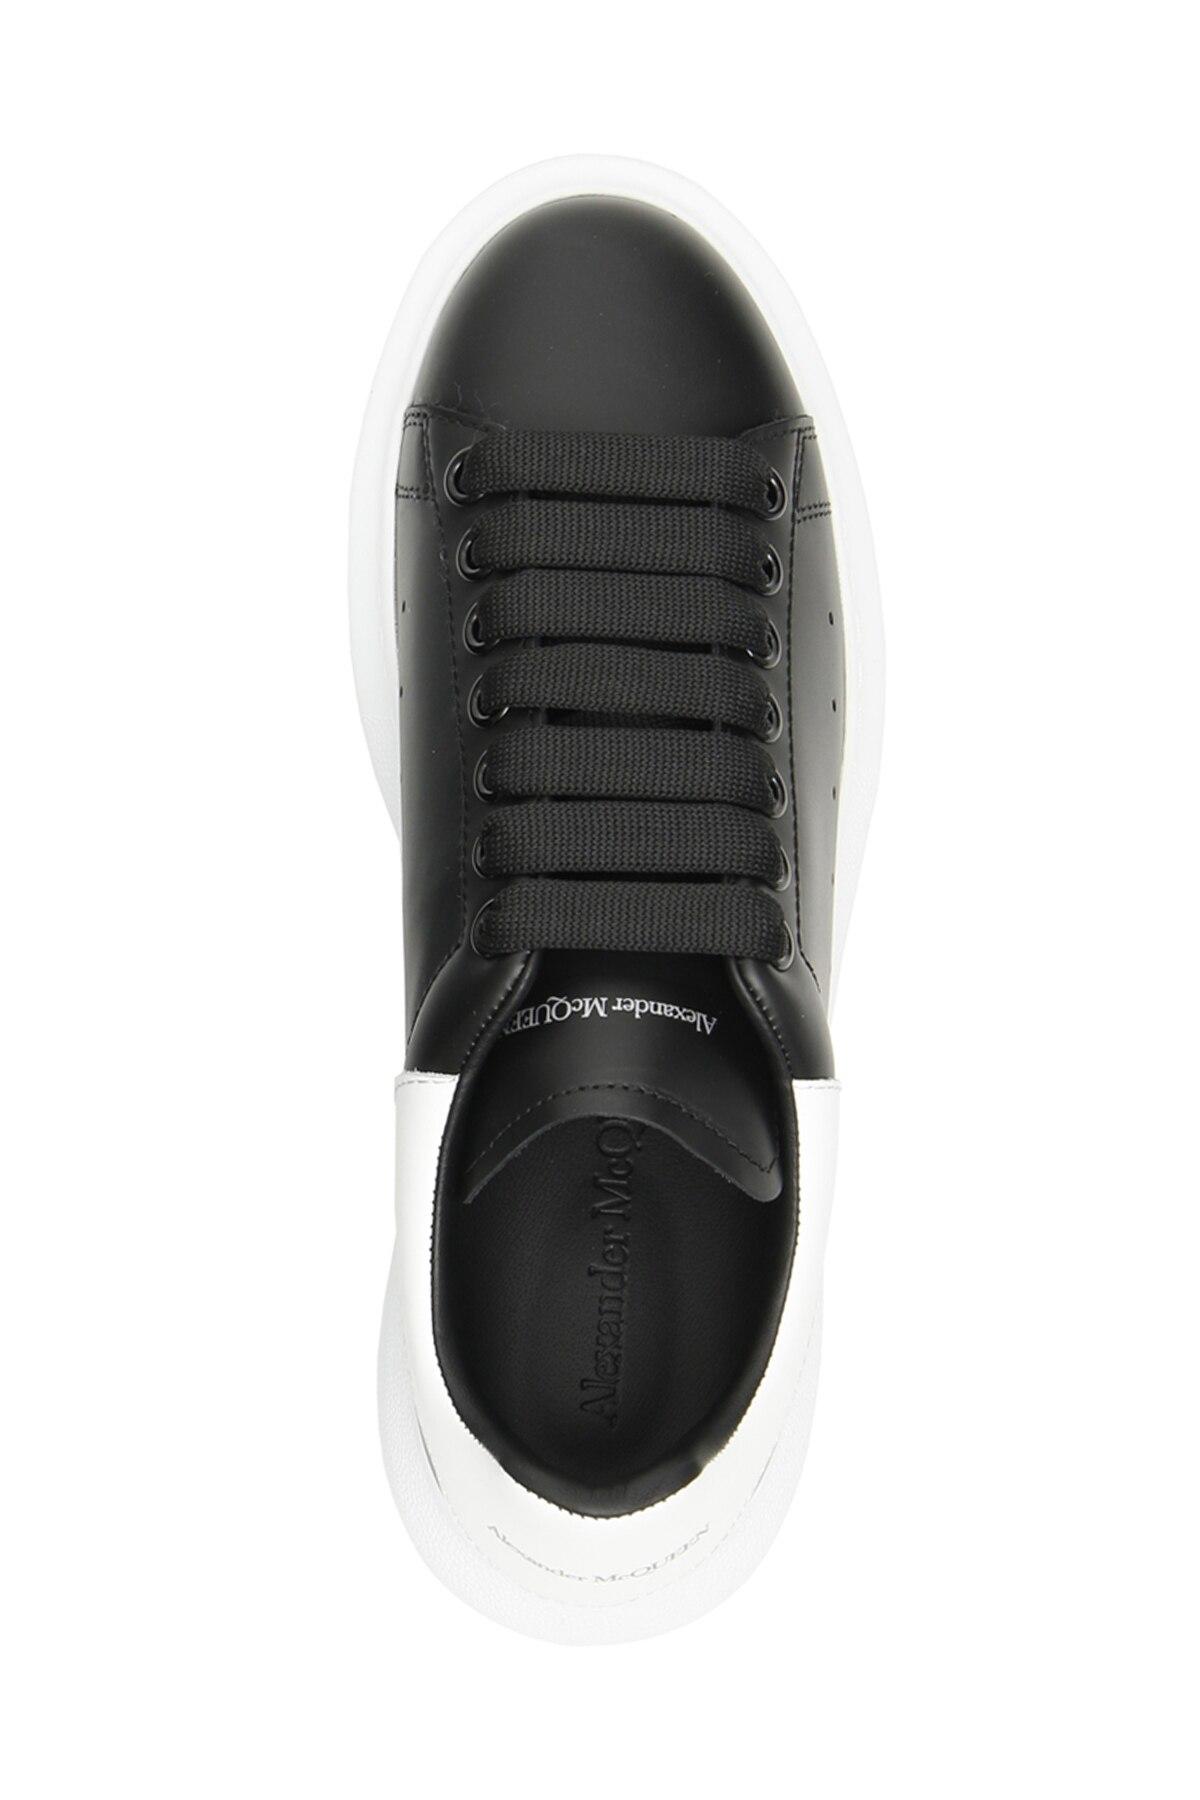 Alexander McQueen Leather Oversized Sole Sneakers Black/white 